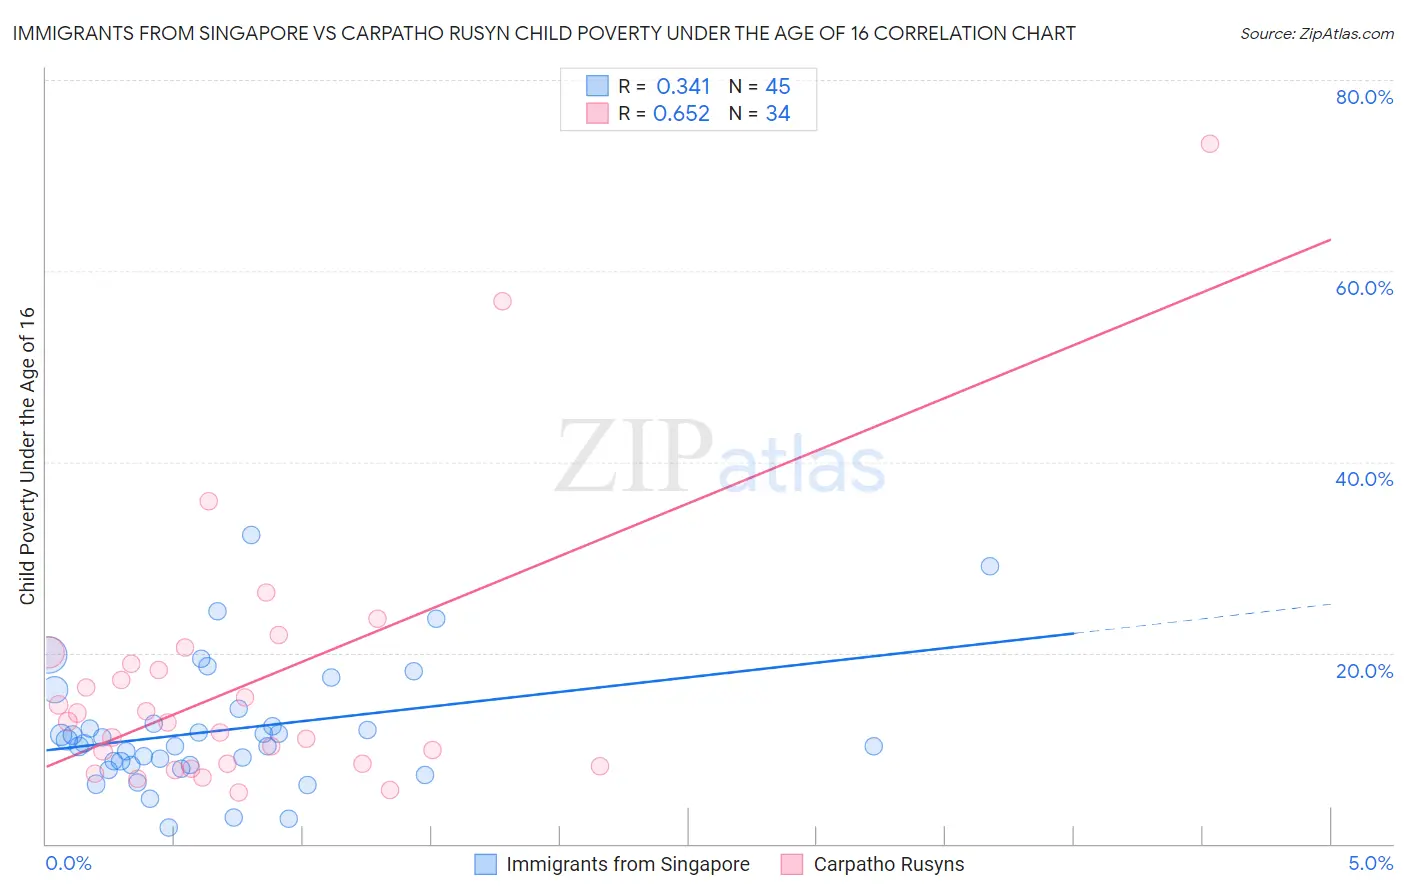 Immigrants from Singapore vs Carpatho Rusyn Child Poverty Under the Age of 16